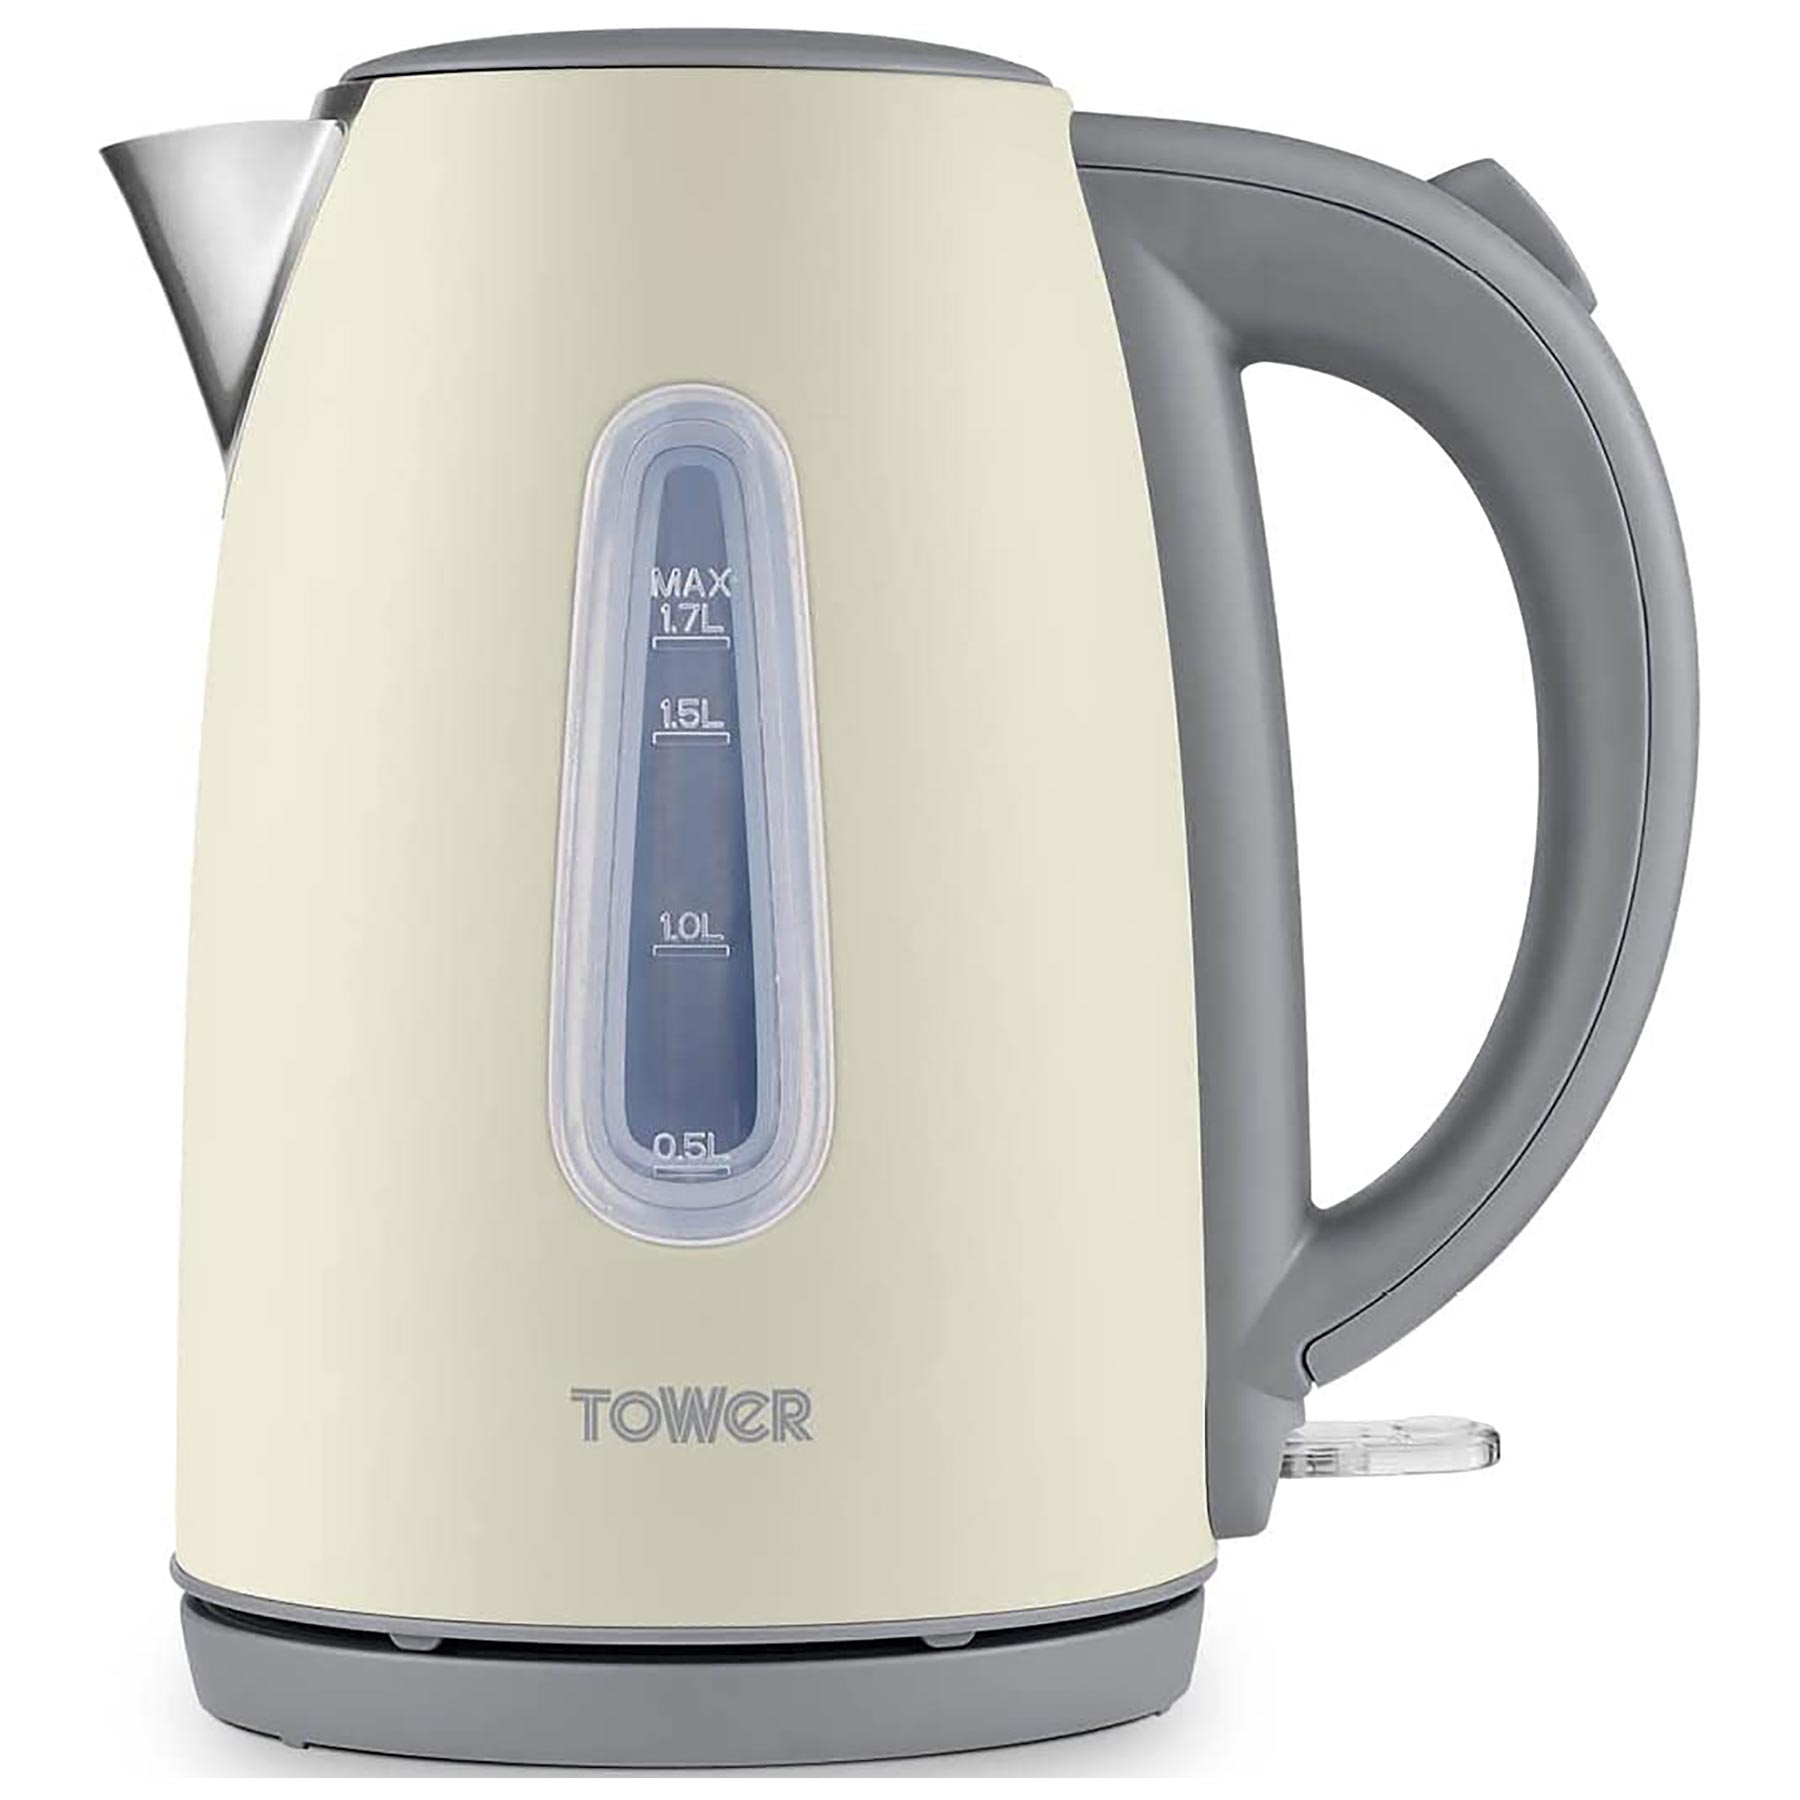 Image of Tower T10048PEB 1 7 Litre Infinity Stone Jug Kettle in Cream 3kW